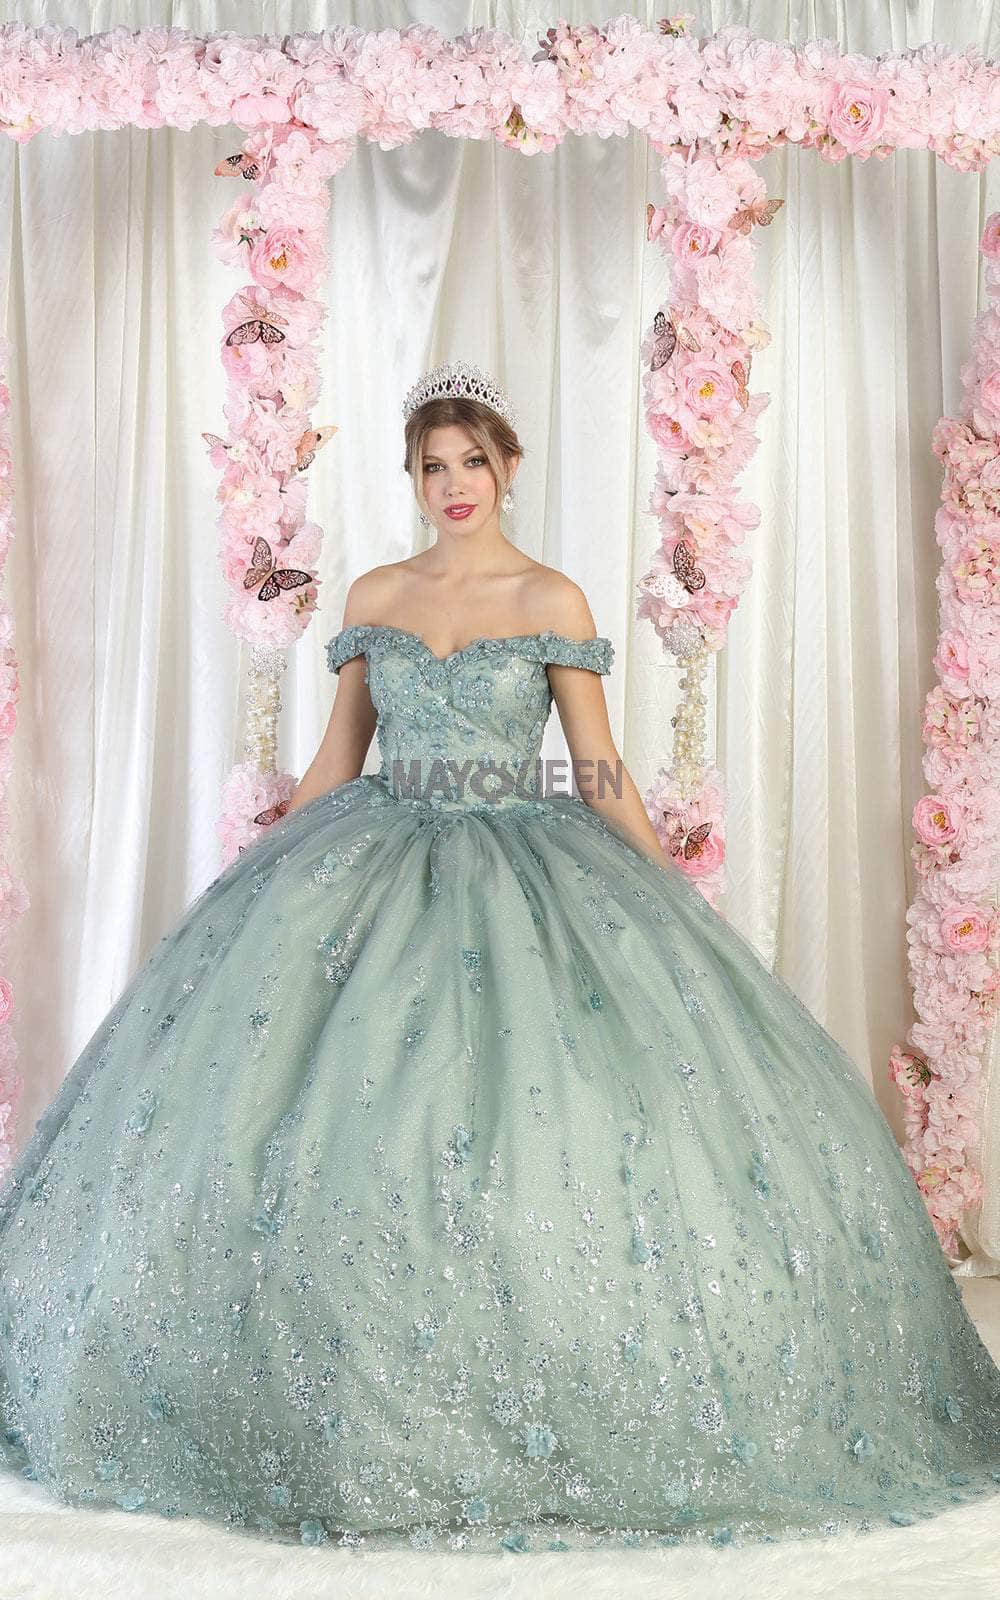 May Queen LK202 - Quinceanera Gown with Choker Necklace Special Occasion Dress